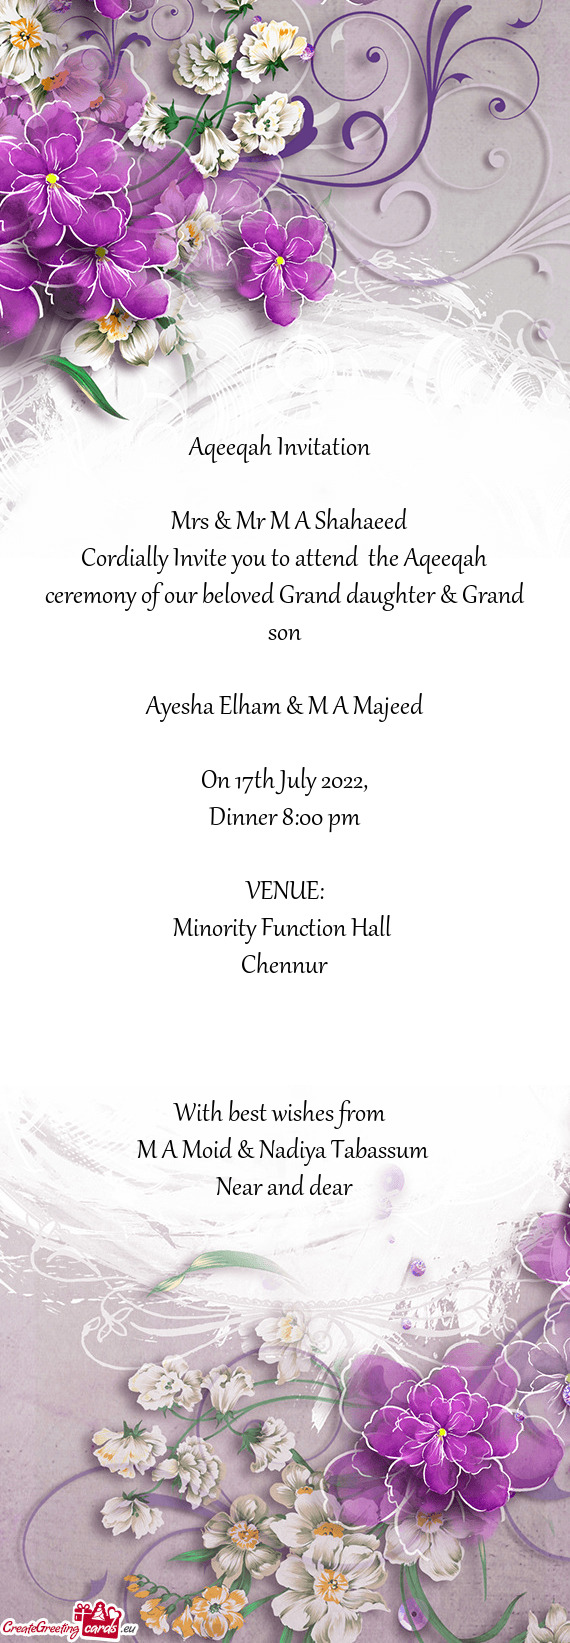 Cordially Invite you to attend the Aqeeqah ceremony of our beloved Grand daughter & Grand son